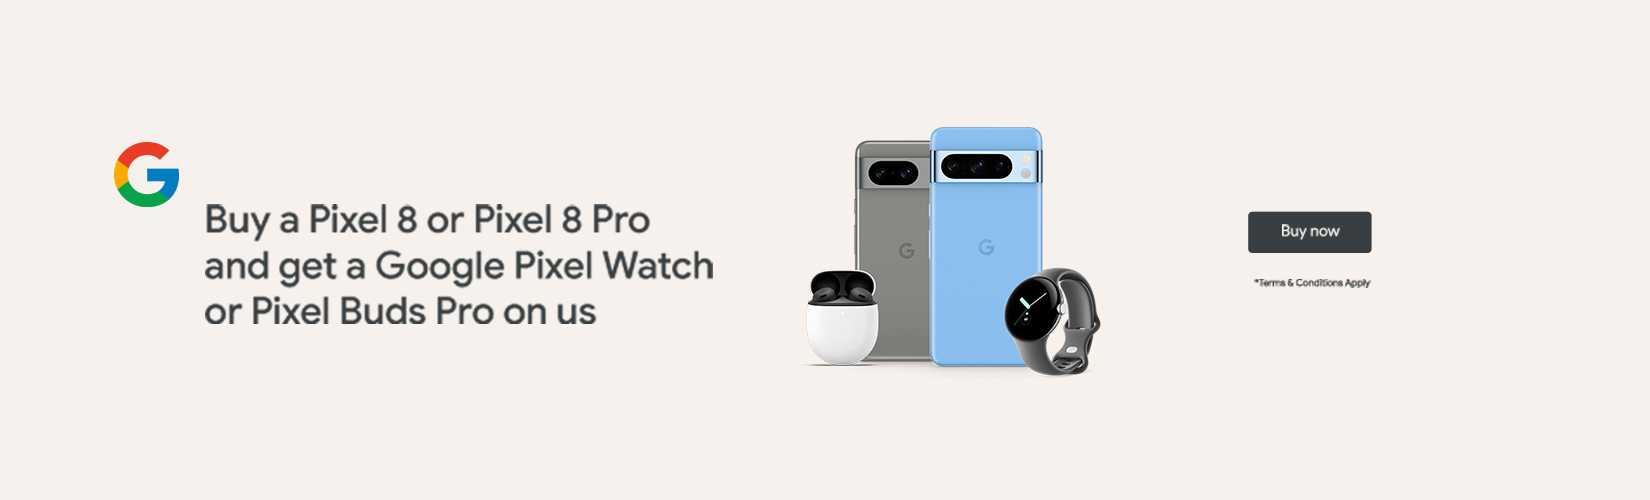 Buy a Pixel 8 or Pixel 8 Pro and get a Google Pixel Watch or Pixel Buds Pro on us.